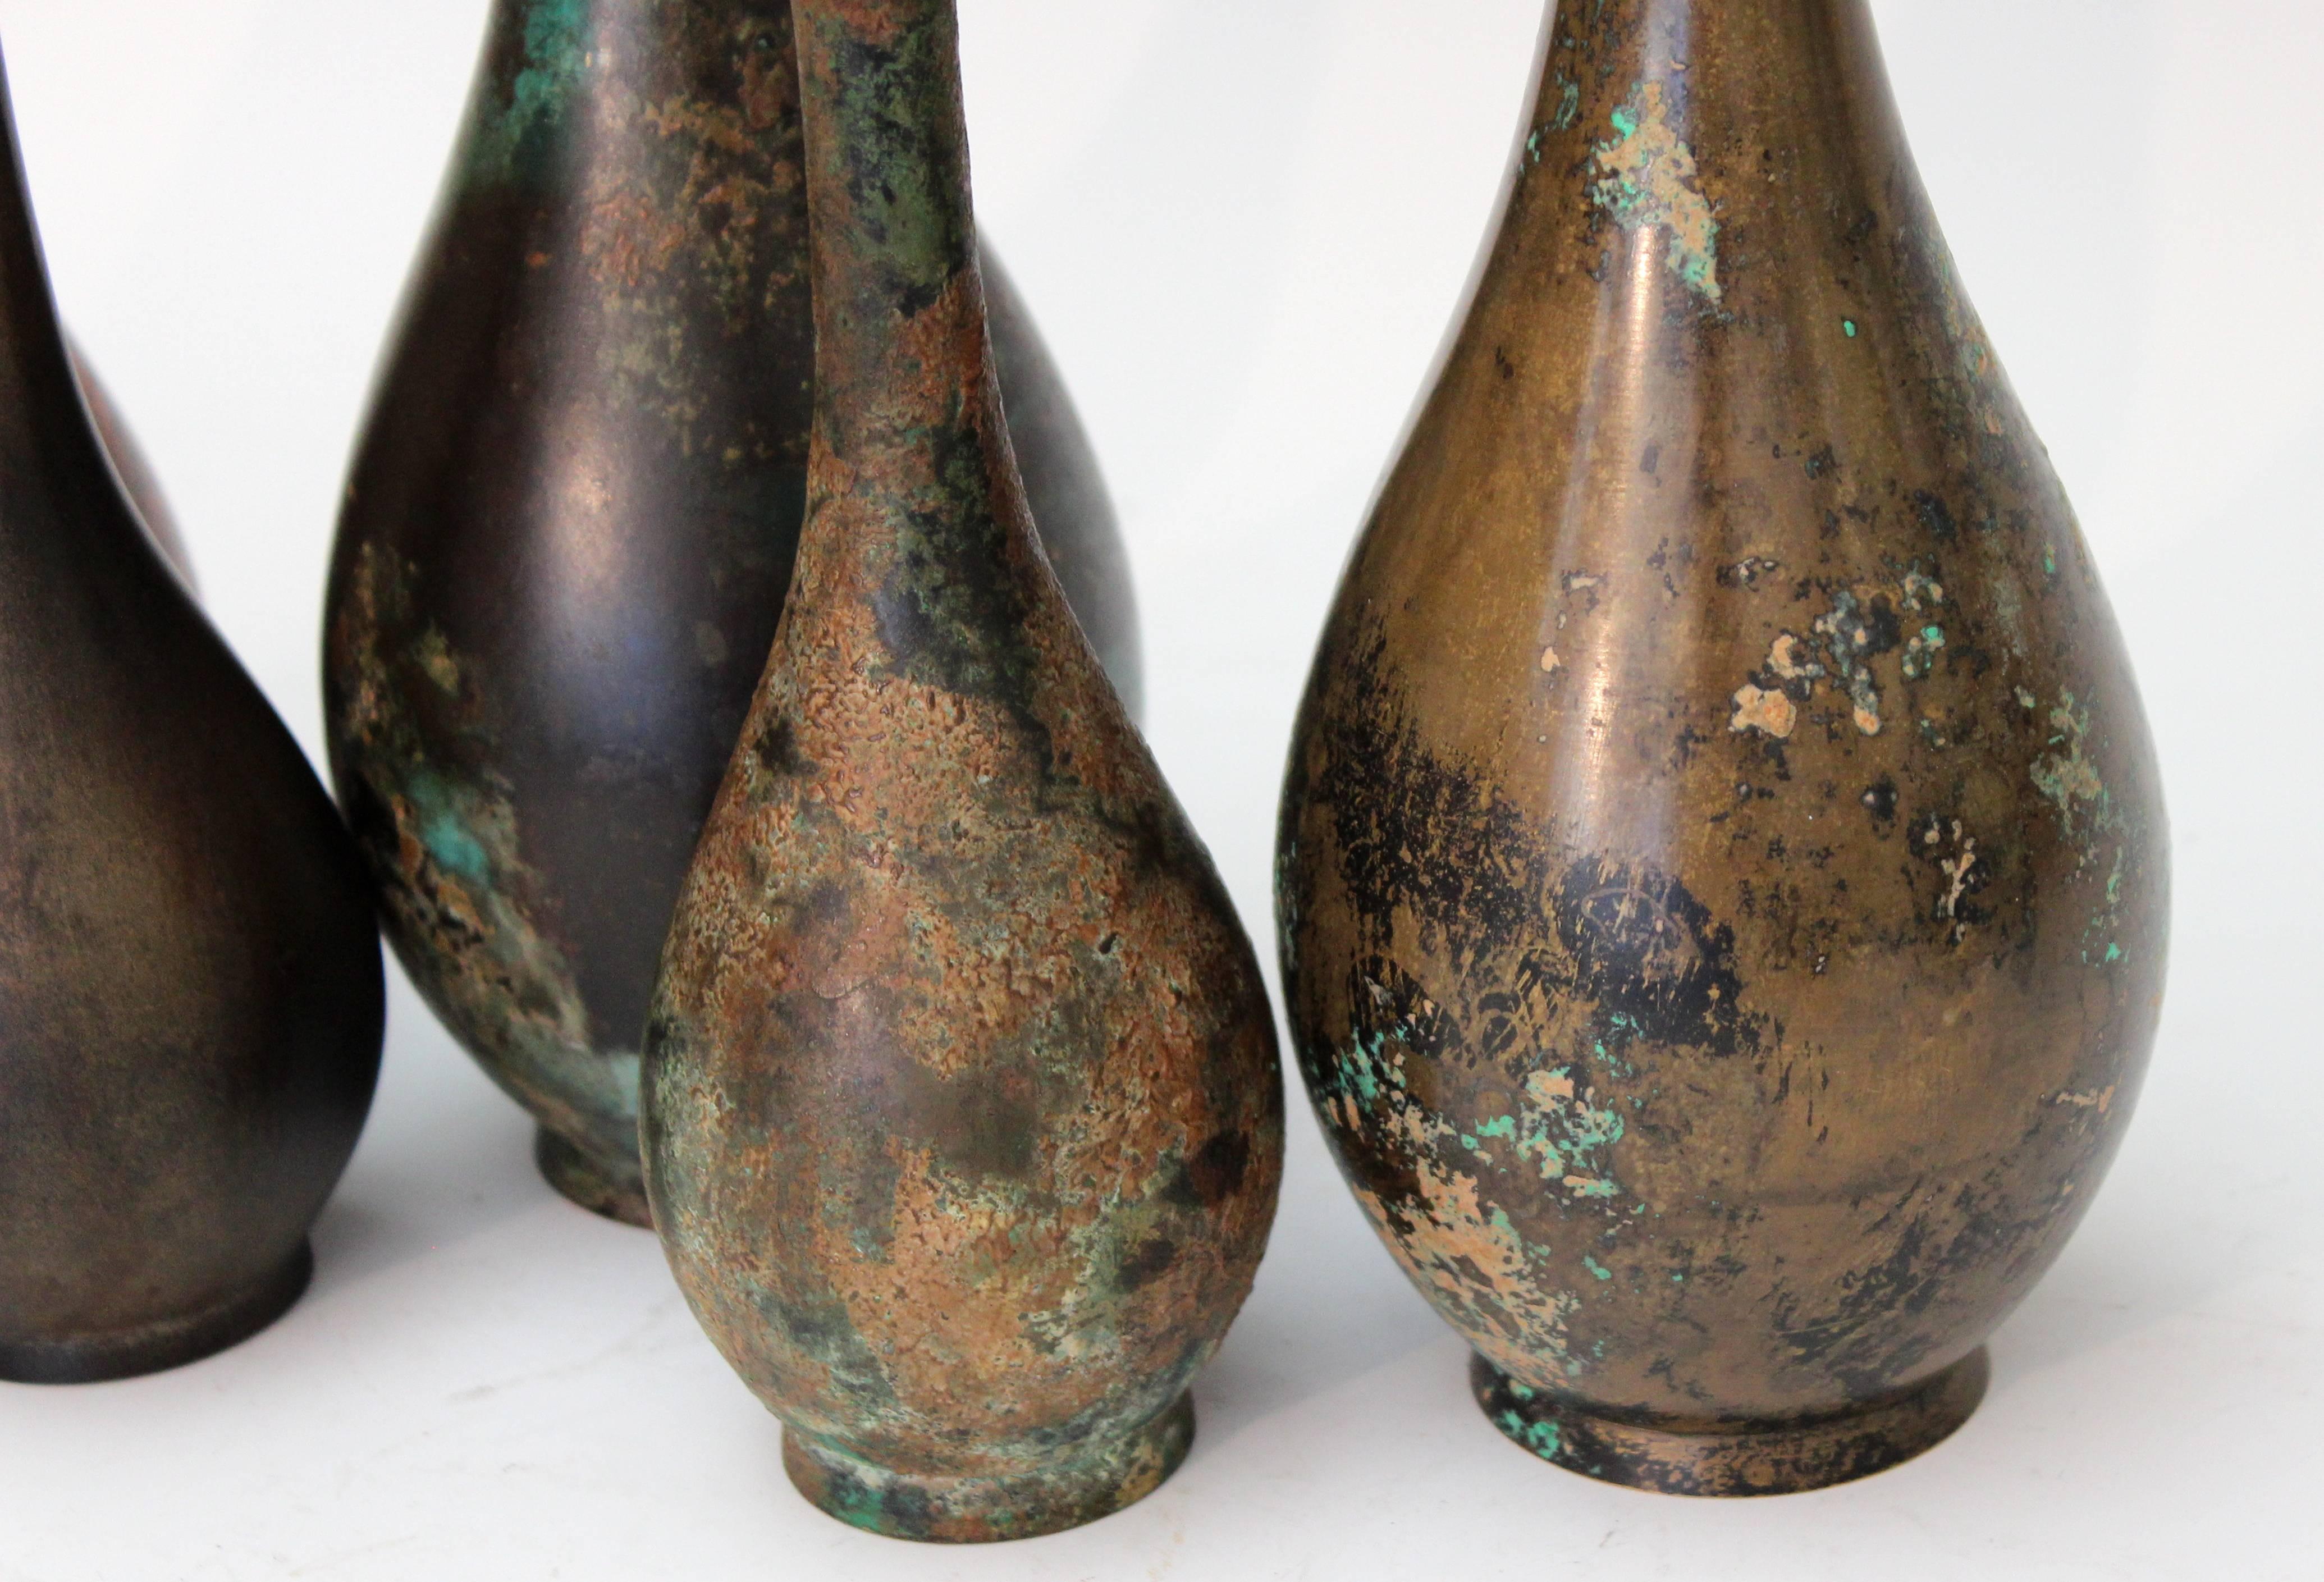 Five vintage Japanese bronze bottle vases with varied applied finishes, circa mid-late 20th century. Measures: 6